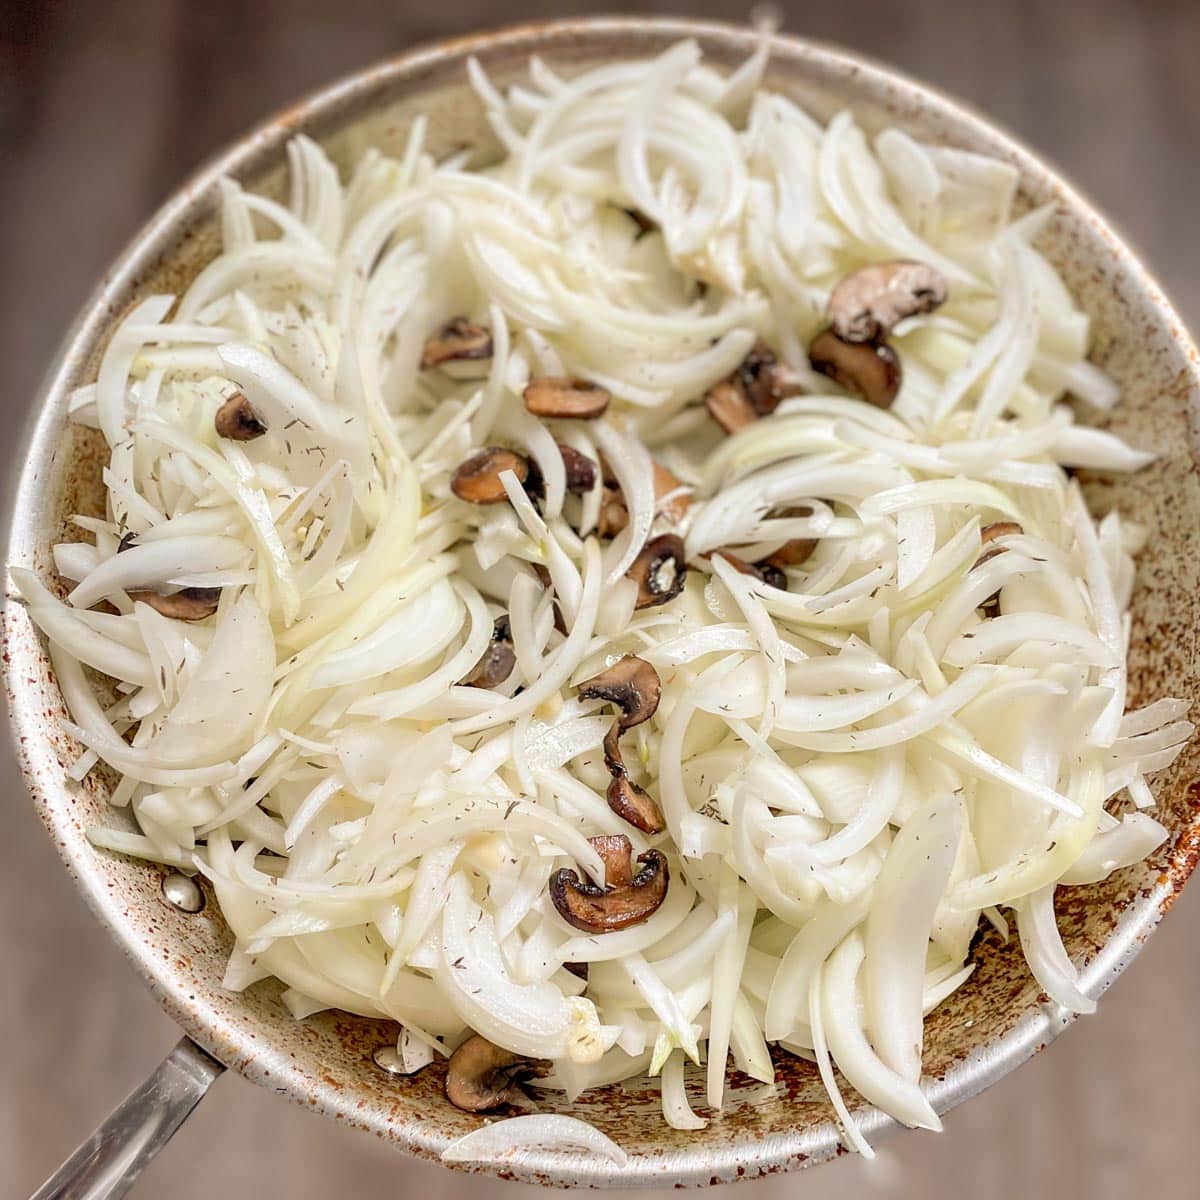 The onions and mushrooms are mixed together.